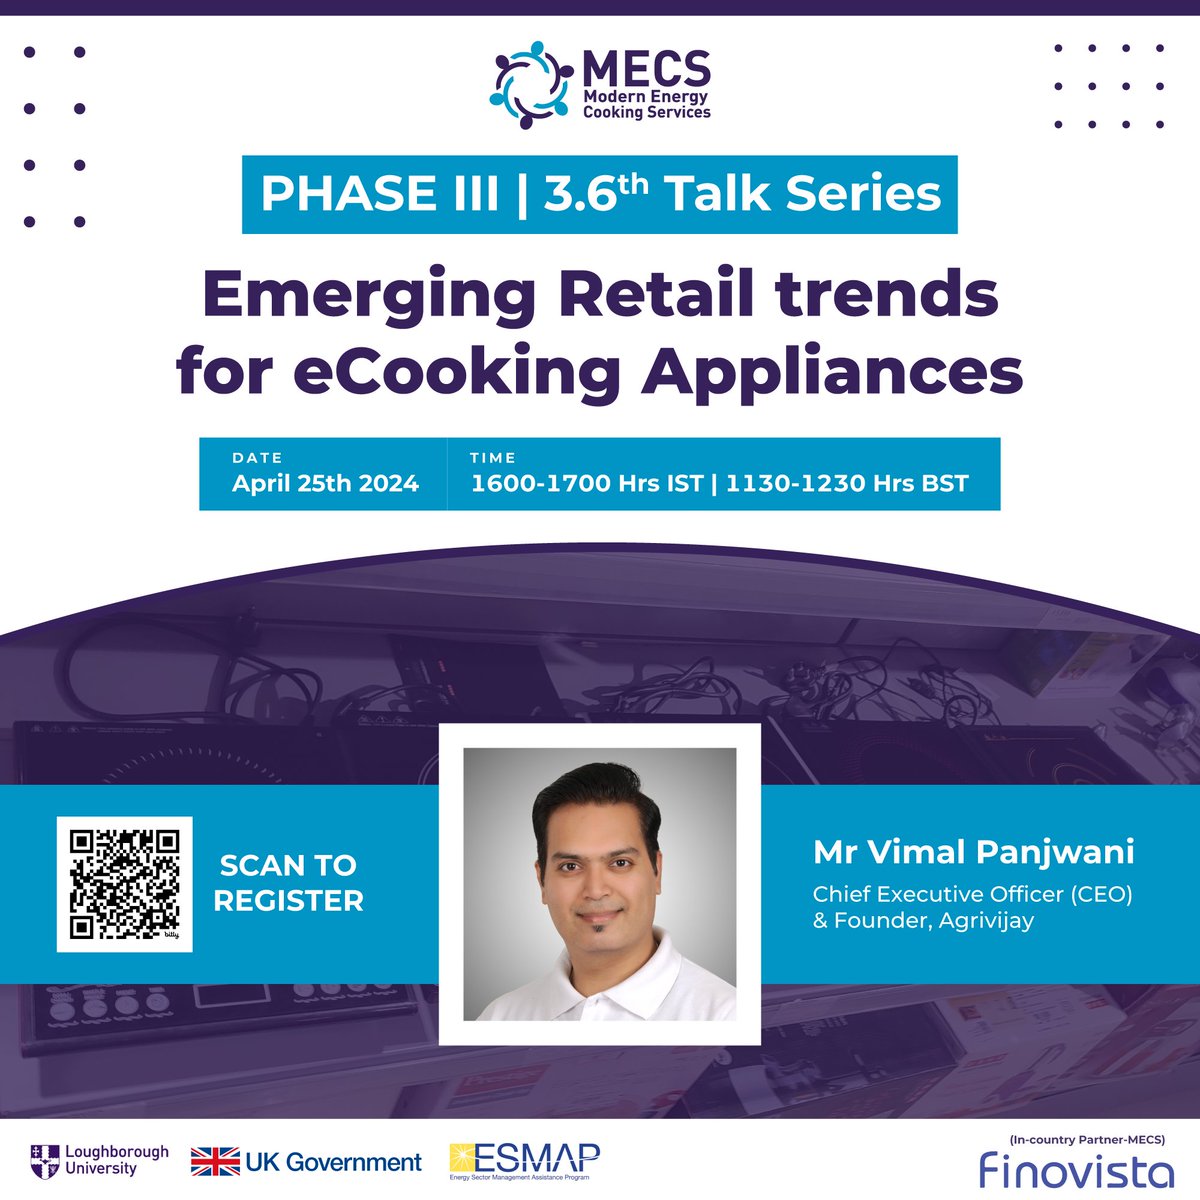 Meet our speaker Mr Vimal Panjwani , AgroVijay, as a distinguished panelist in our #6thTalkSeries, Phase III on the theme 'Emerging Retail trends for eCooking Appliances' at 1600 Hrs IST/1130 Hrs BST on 25-04-24. ✨ Register: bit.ly/467sMne #ecooking #cleancooking